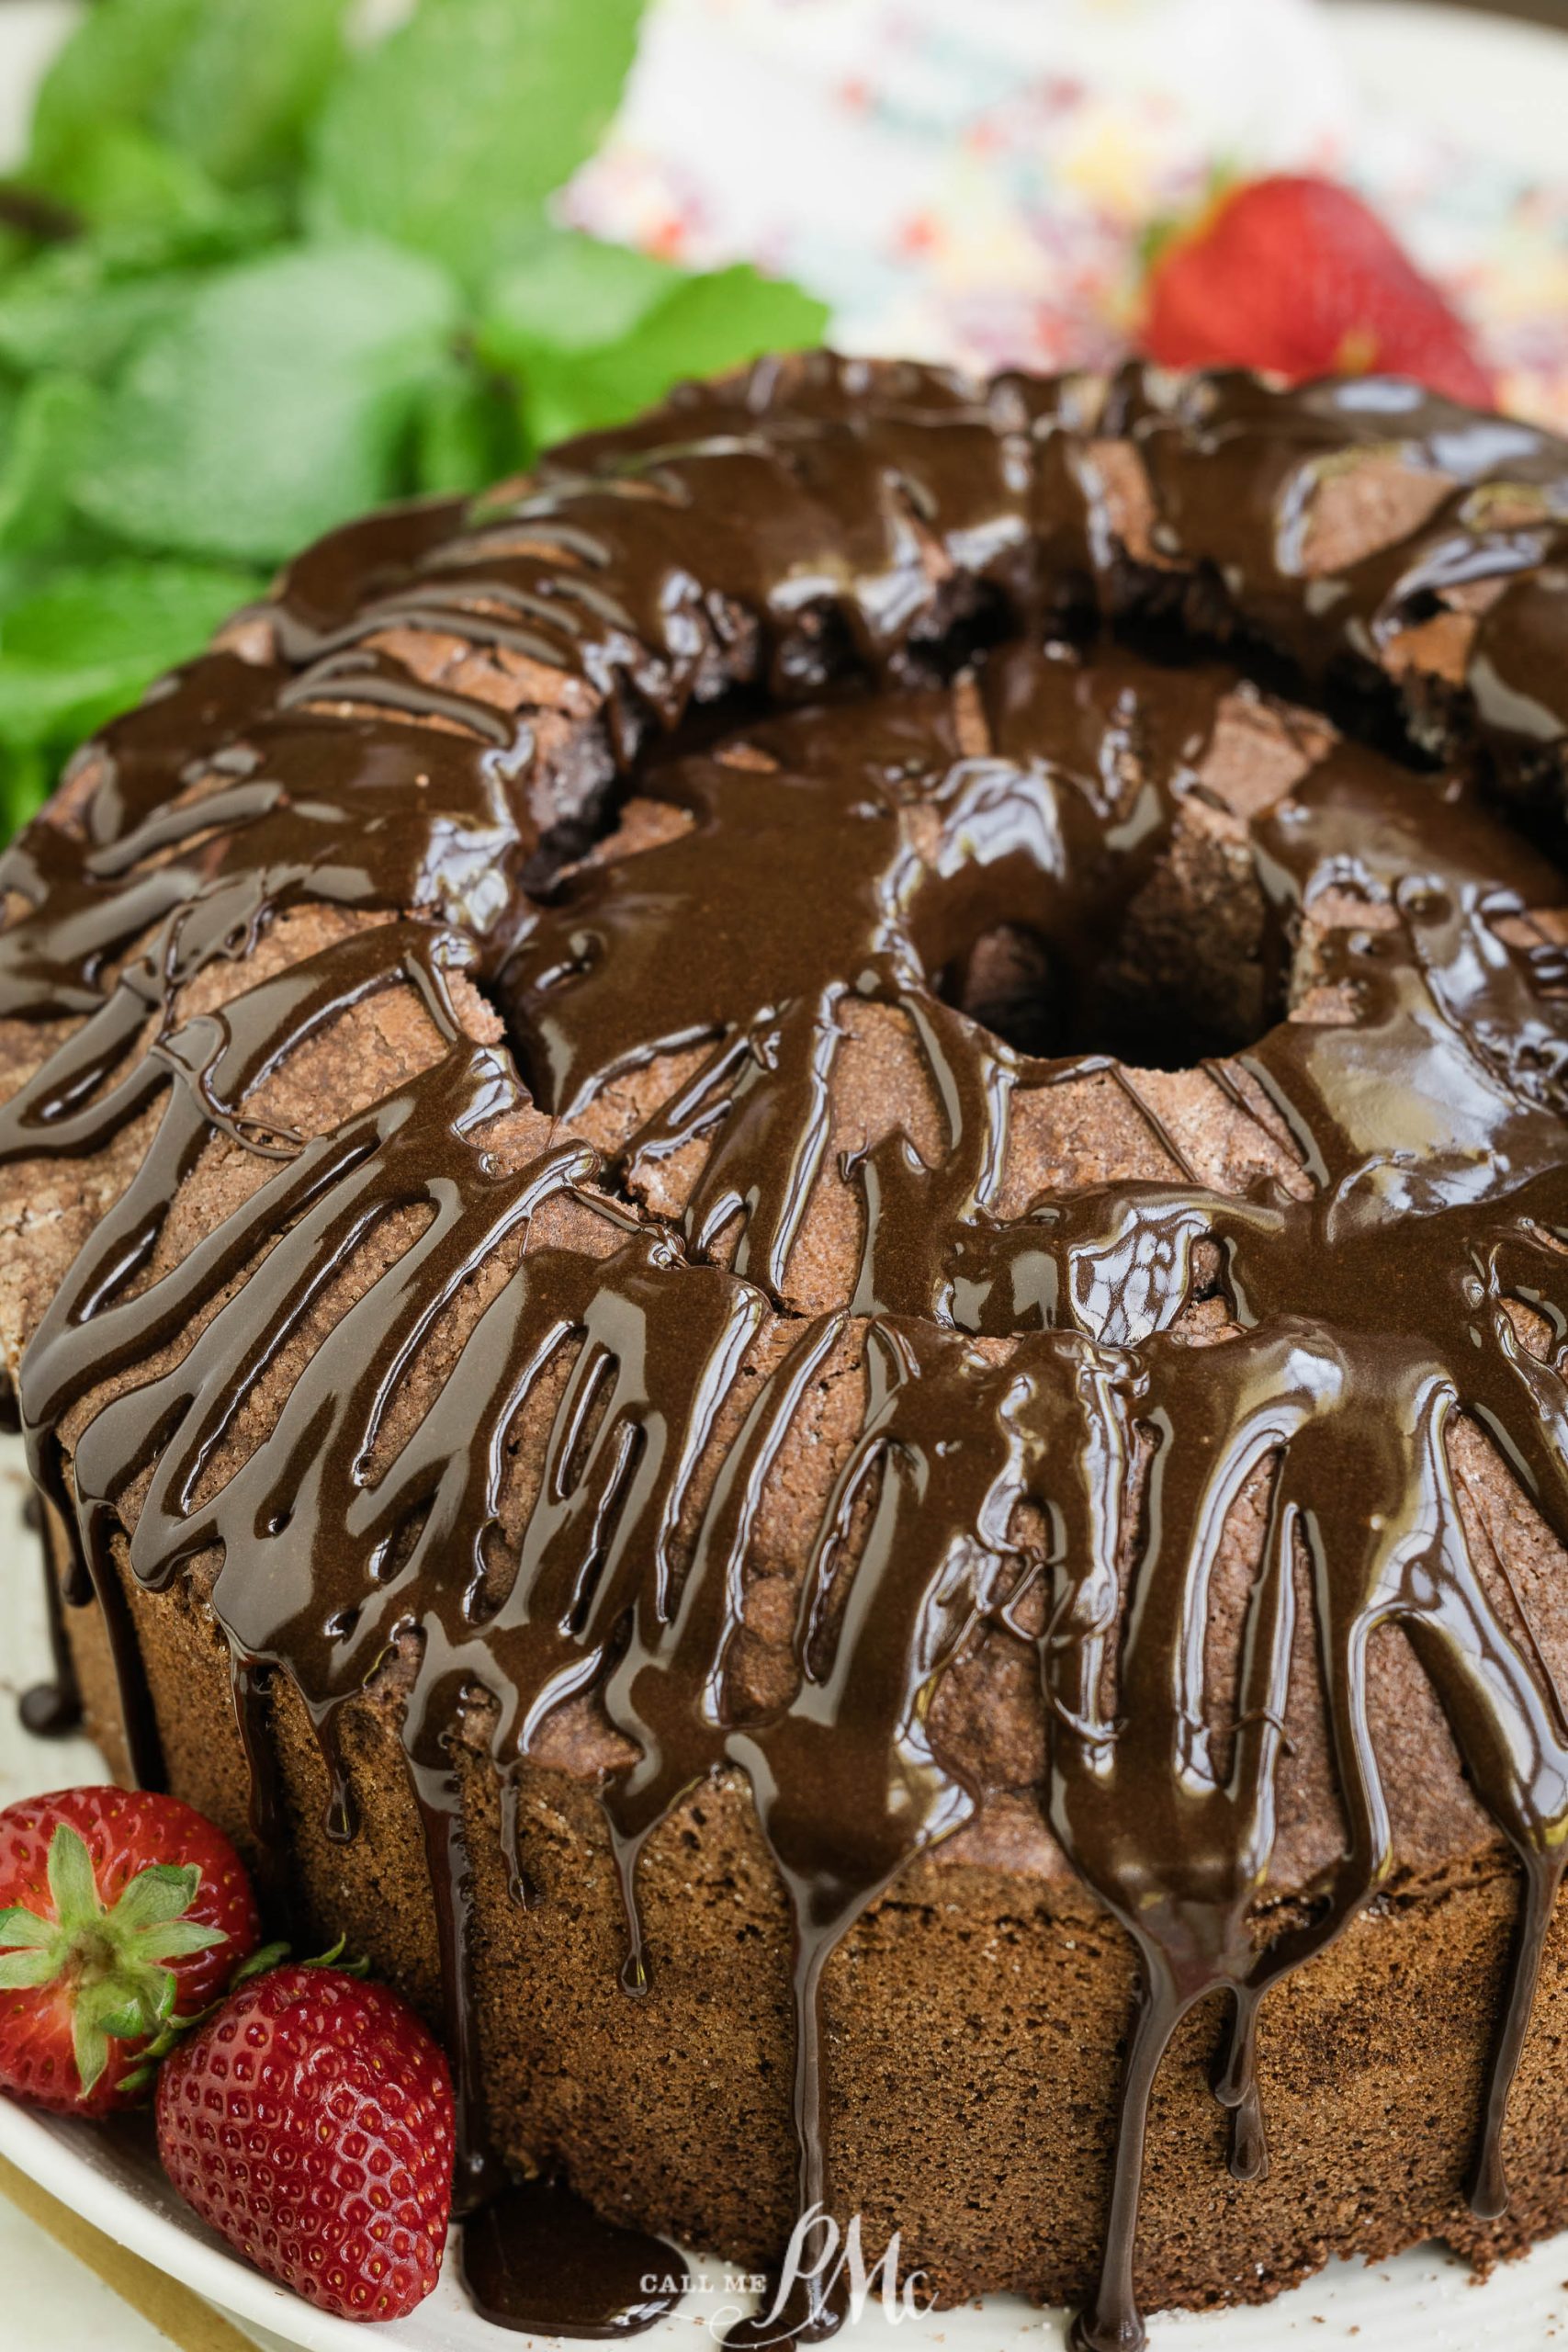 A bundt cake with a rich chocolate glaze drizzling down its sides, garnished with a fresh strawberry, presented on a plate with mint leaves in the background.